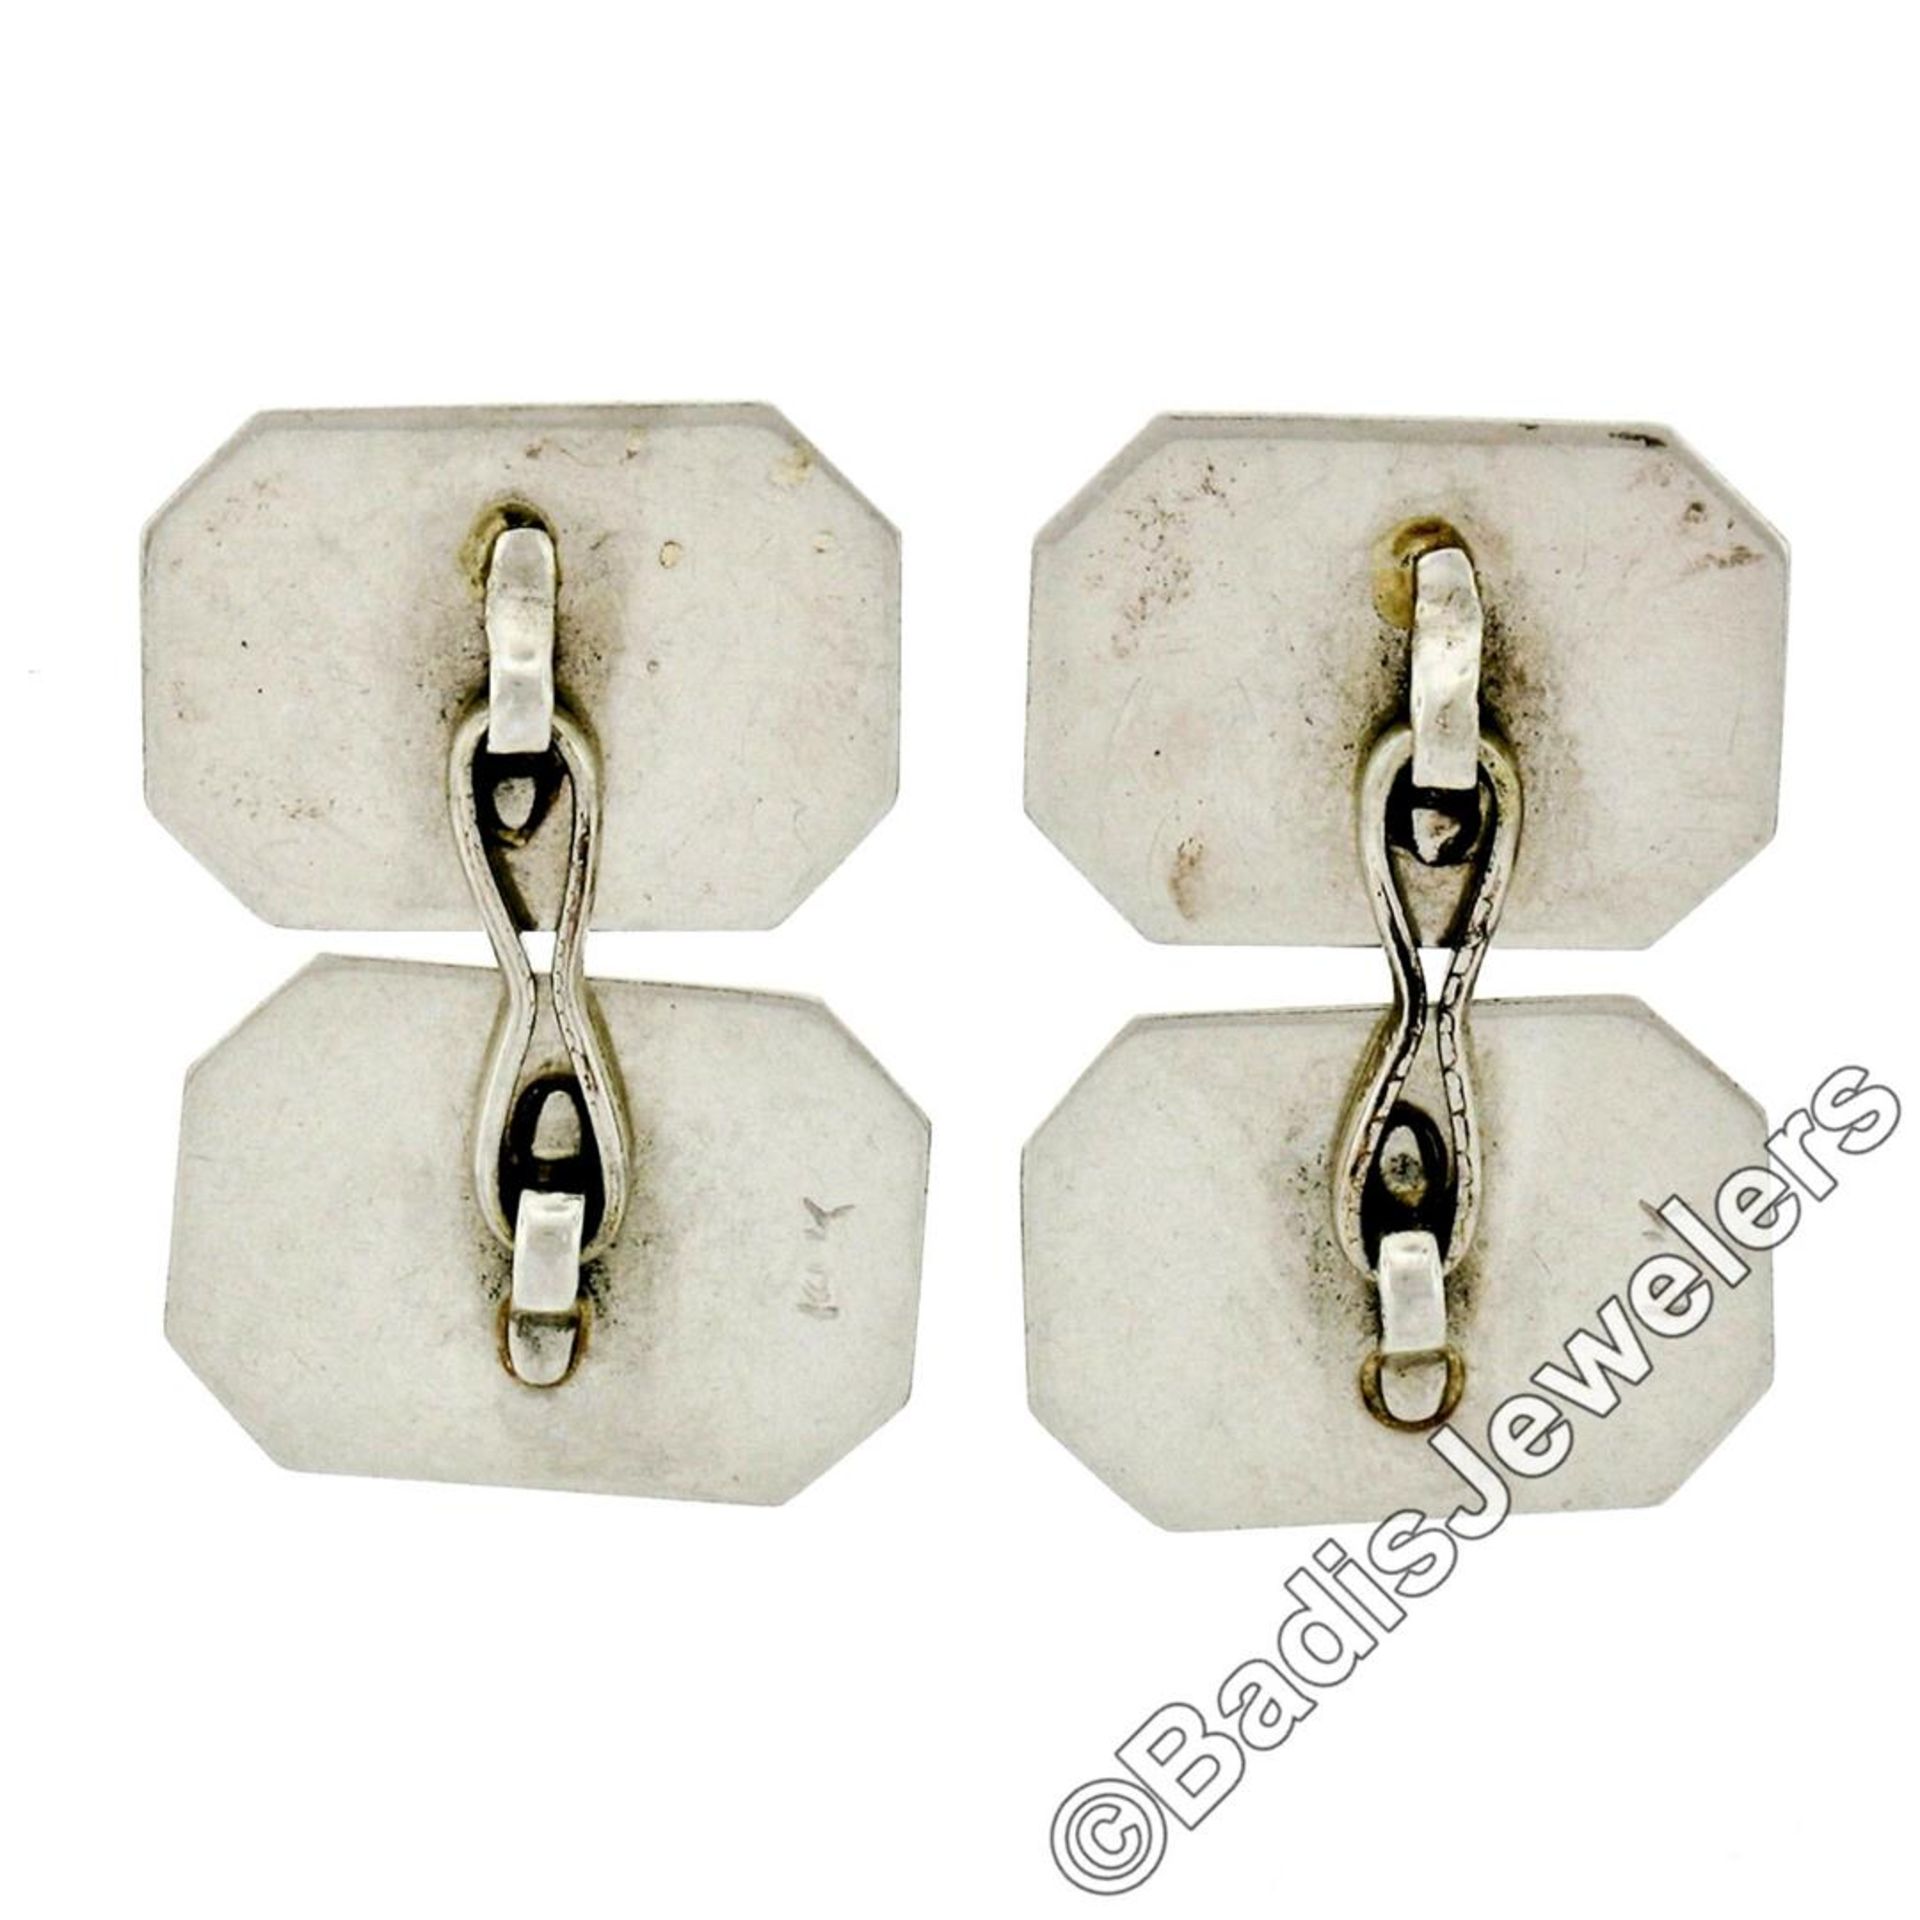 Antique Art Deco 14kt White Gold Etched Dual Panel Cuff Links - Image 5 of 5